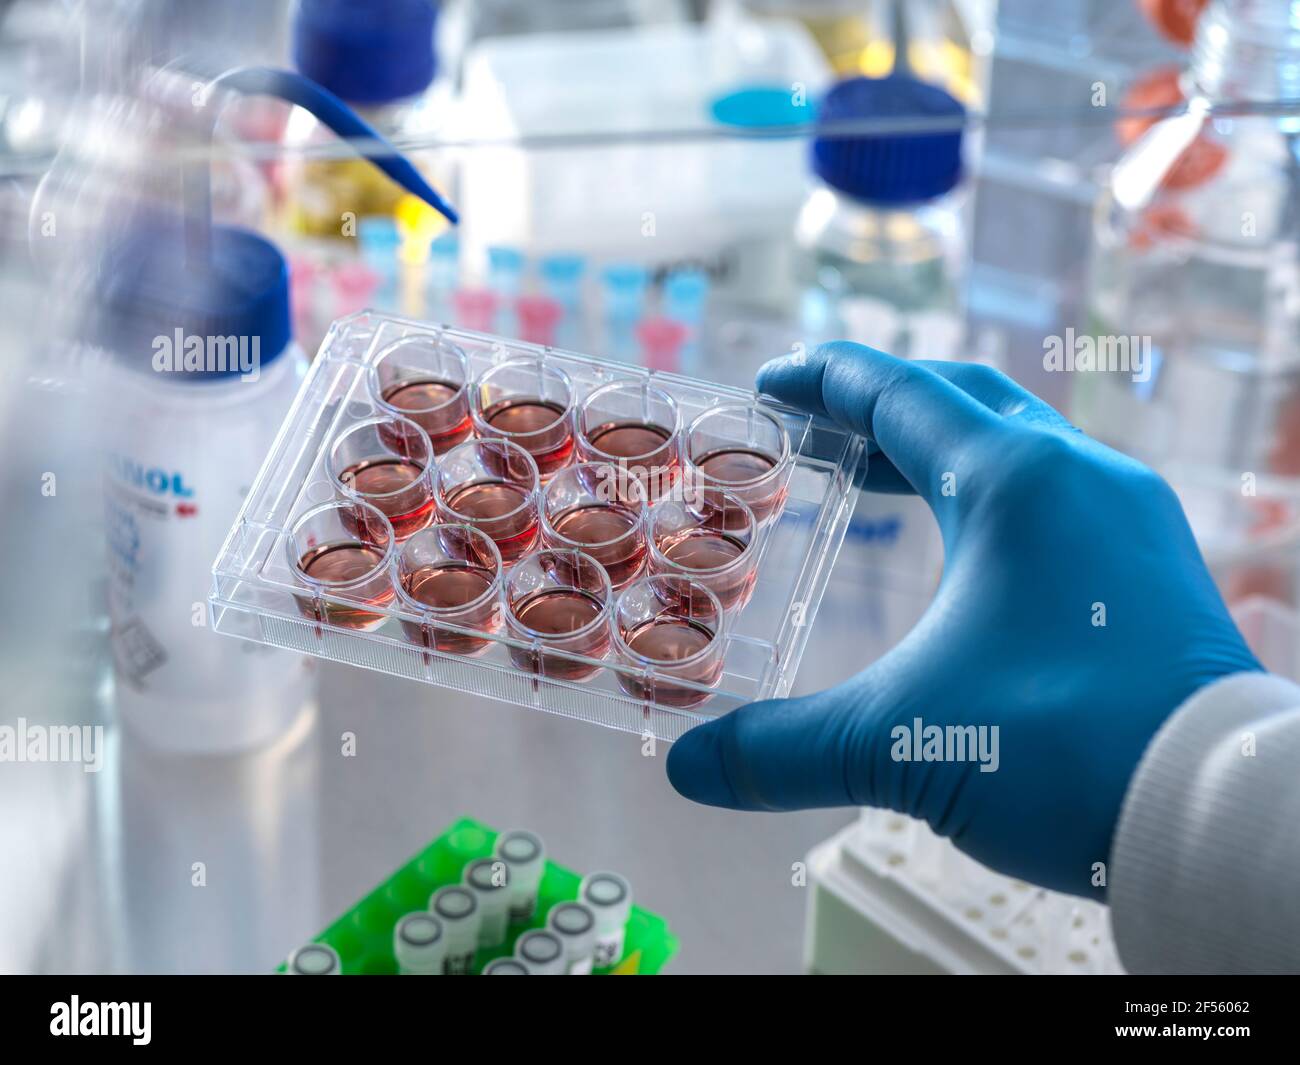 Scientist holding multi well plate with blood samples in fume hood Stock Photo